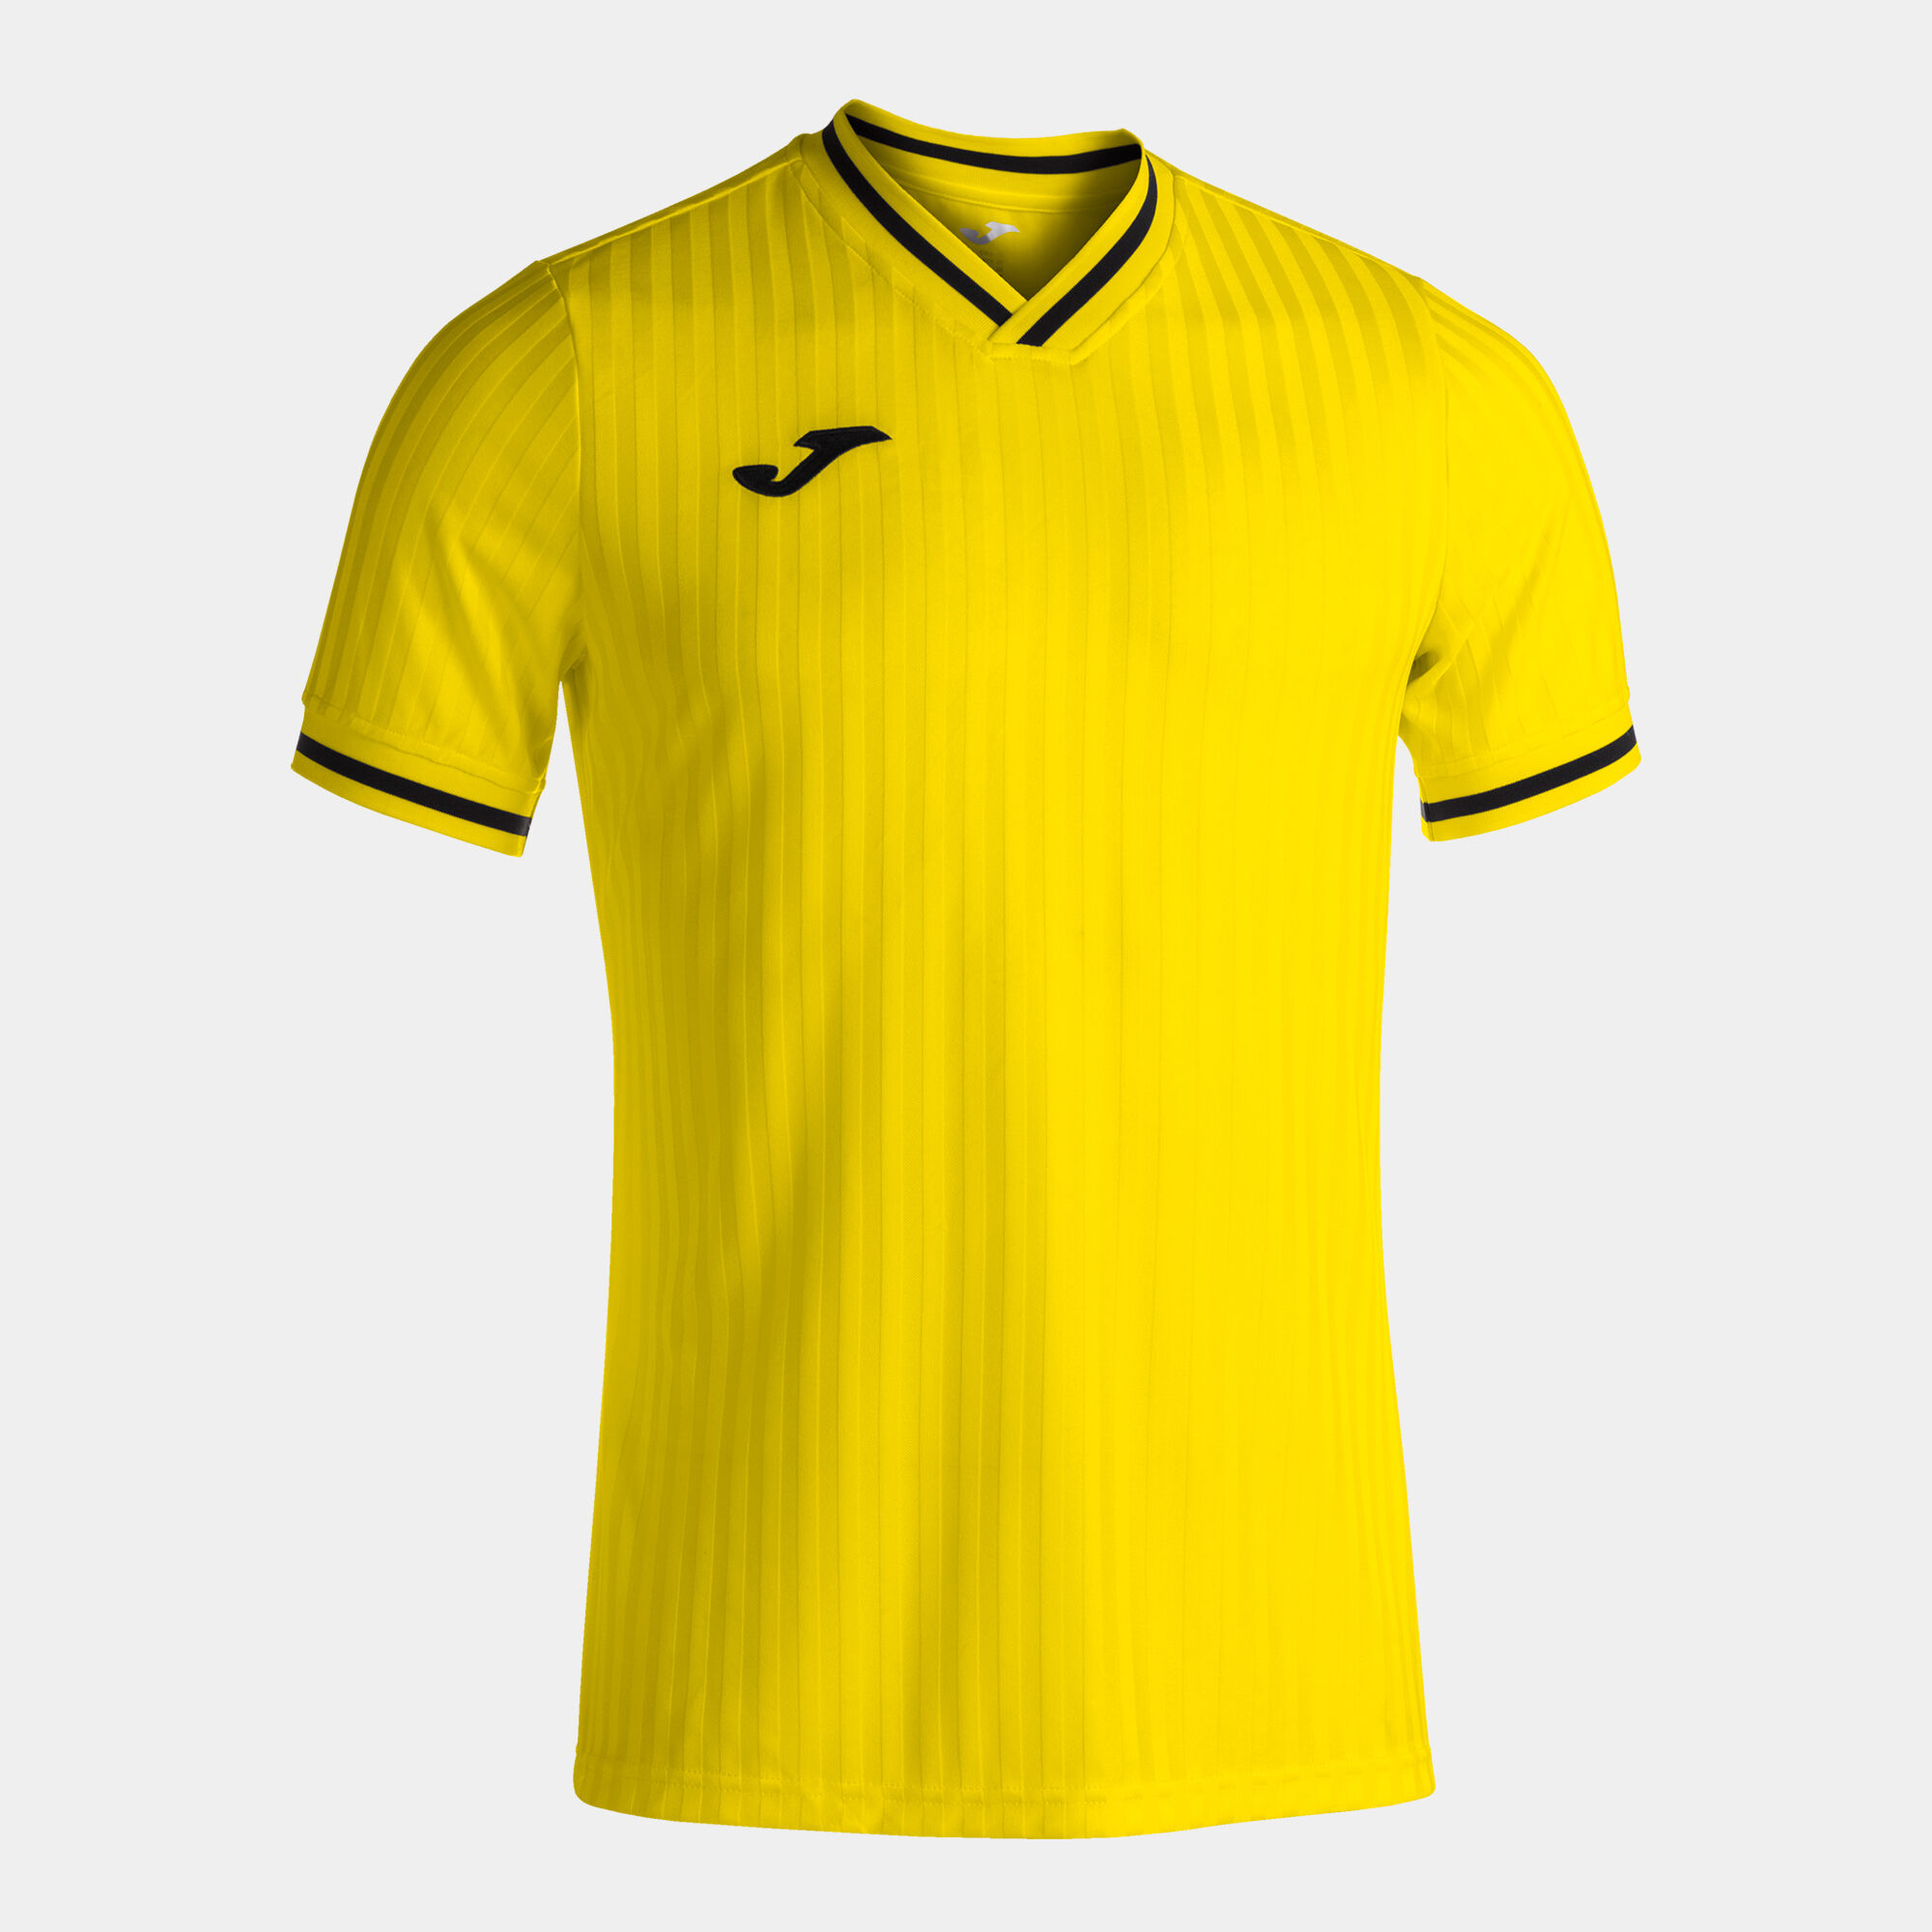 MAILLOT MANCHES COURTES HOMME TOLETUM III JAUNE